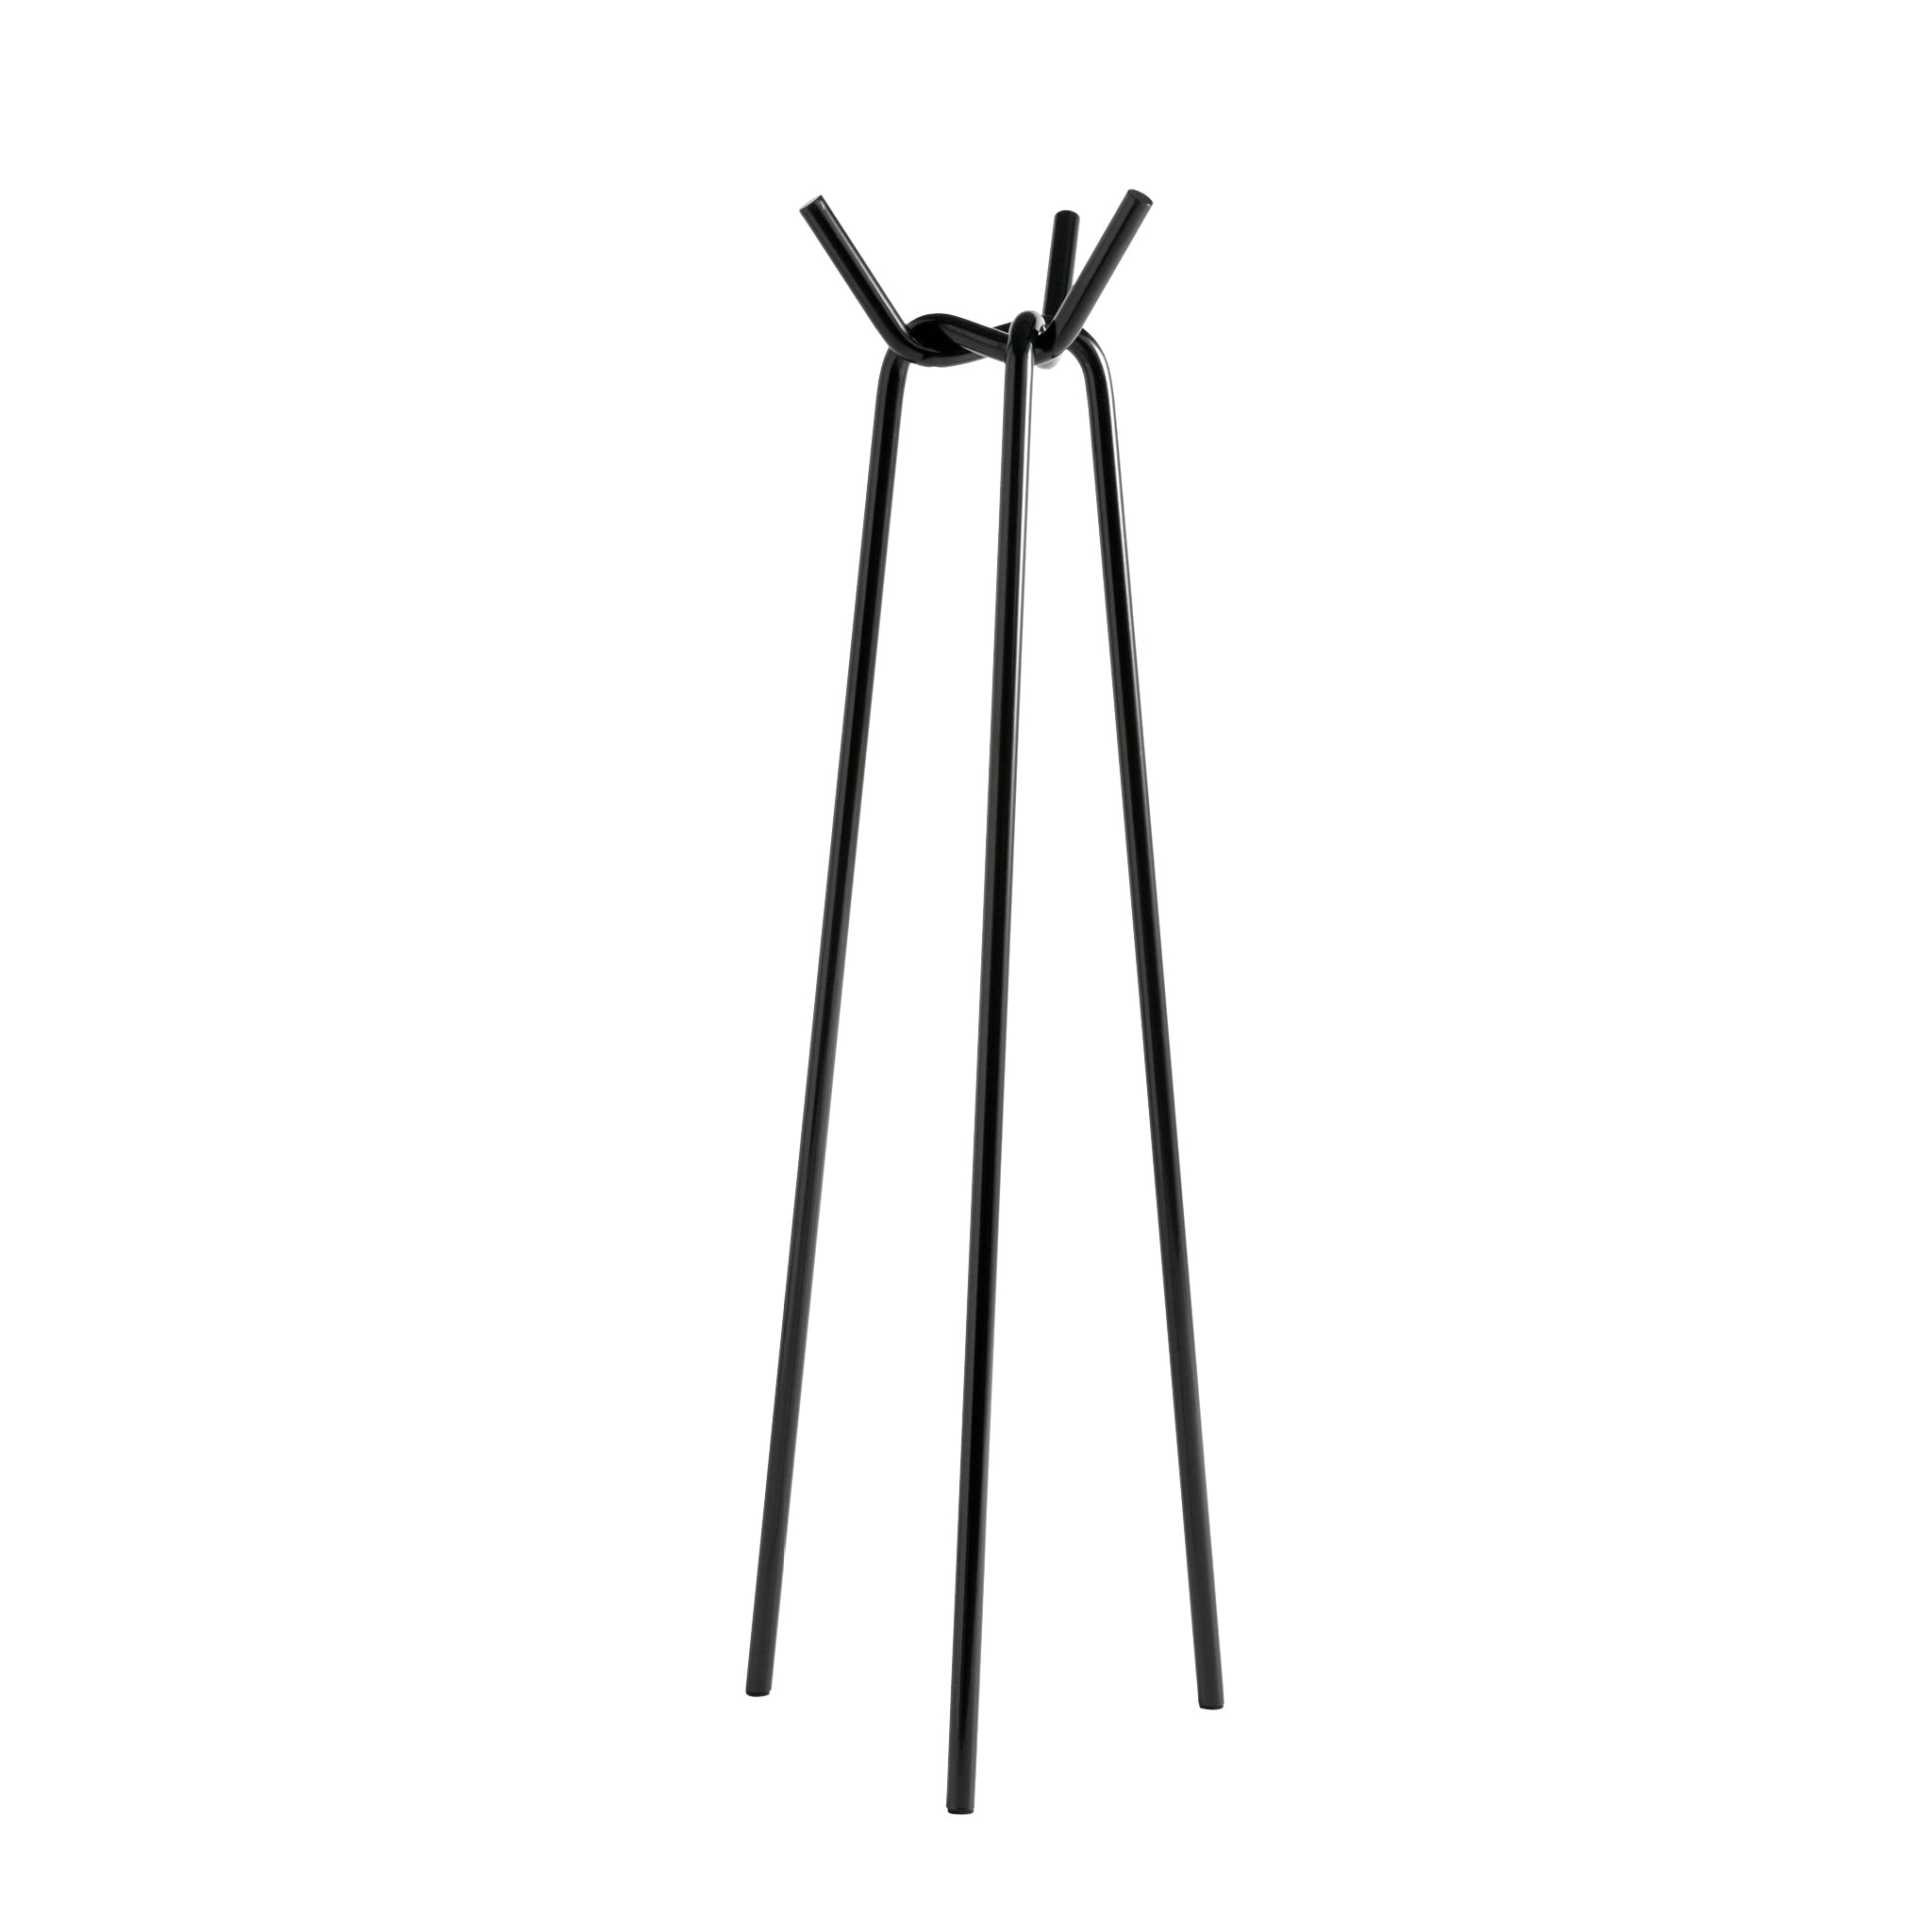 Knit Coat Stand by Hay